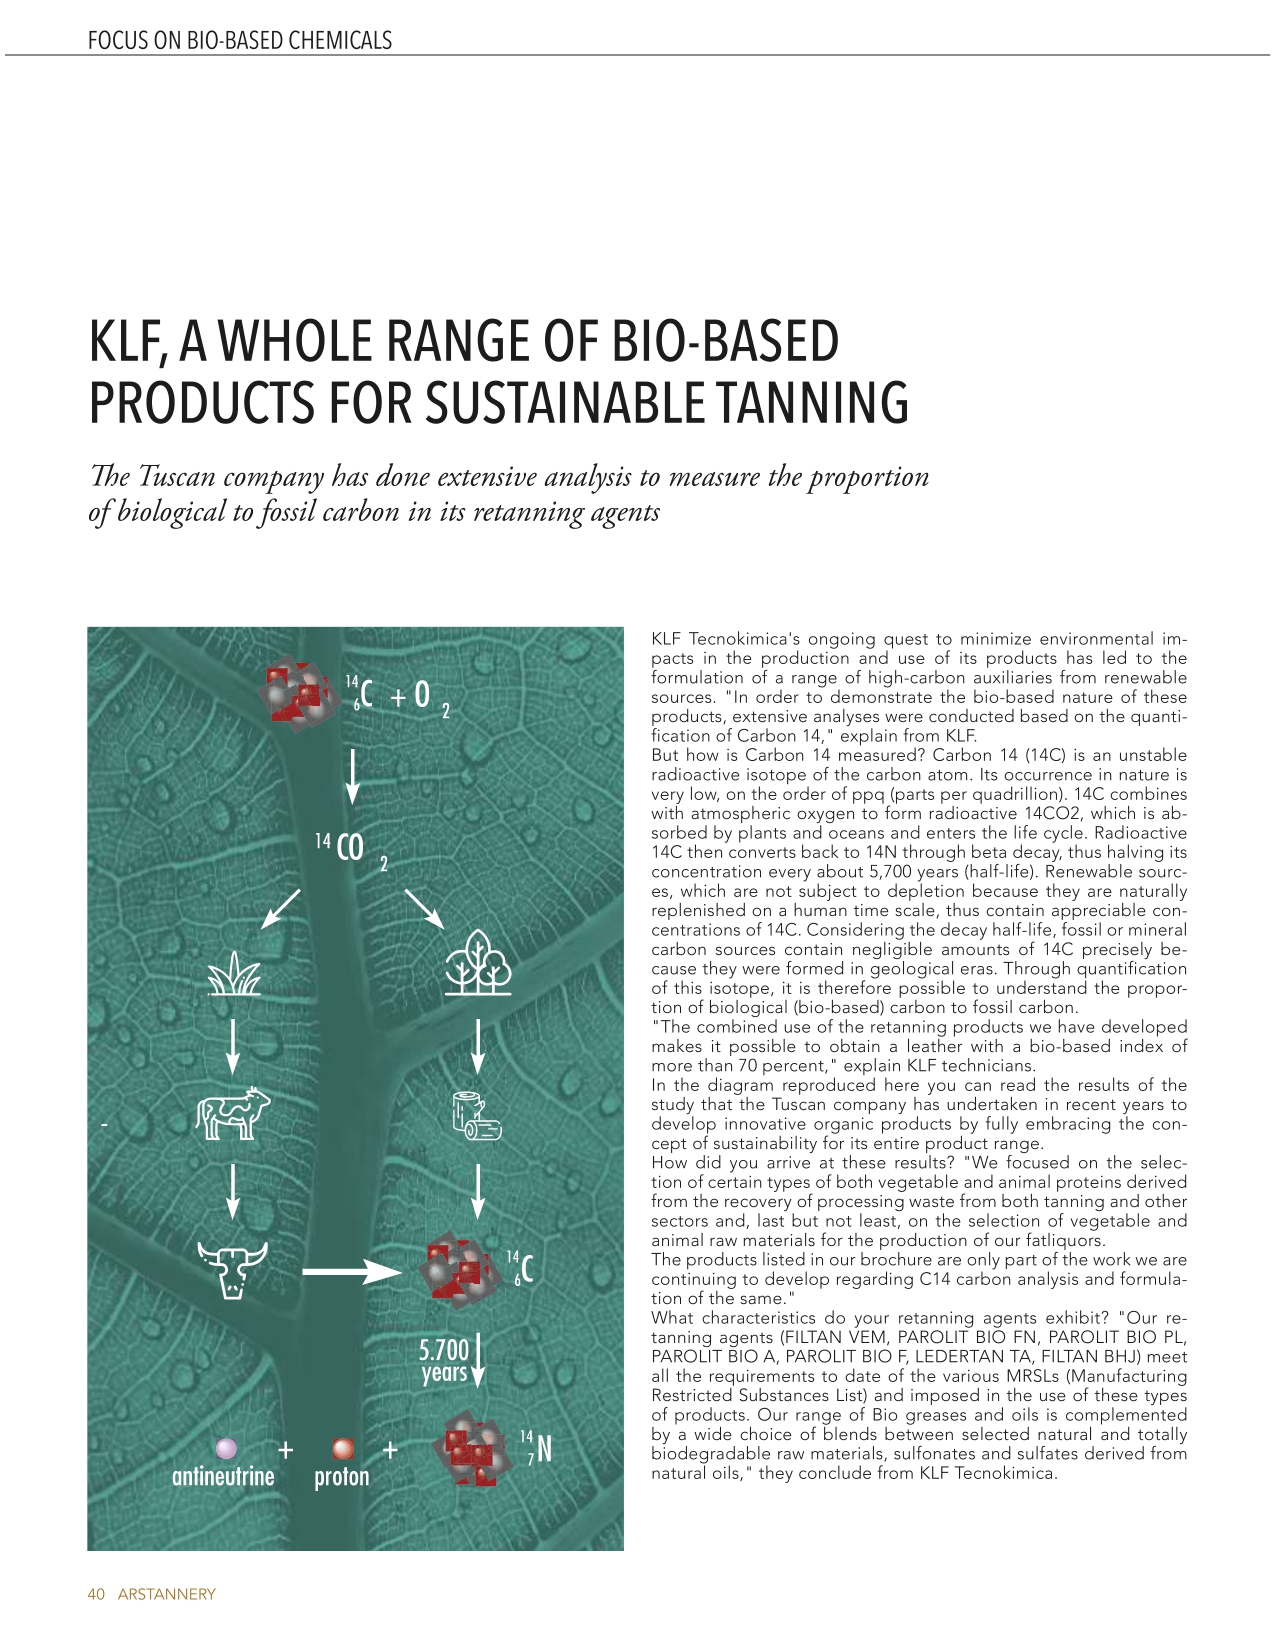 KLF, A WHOLE RANGE OF BIO-BASED PRODUCTS FOR SUSTAINABLE TANNING 